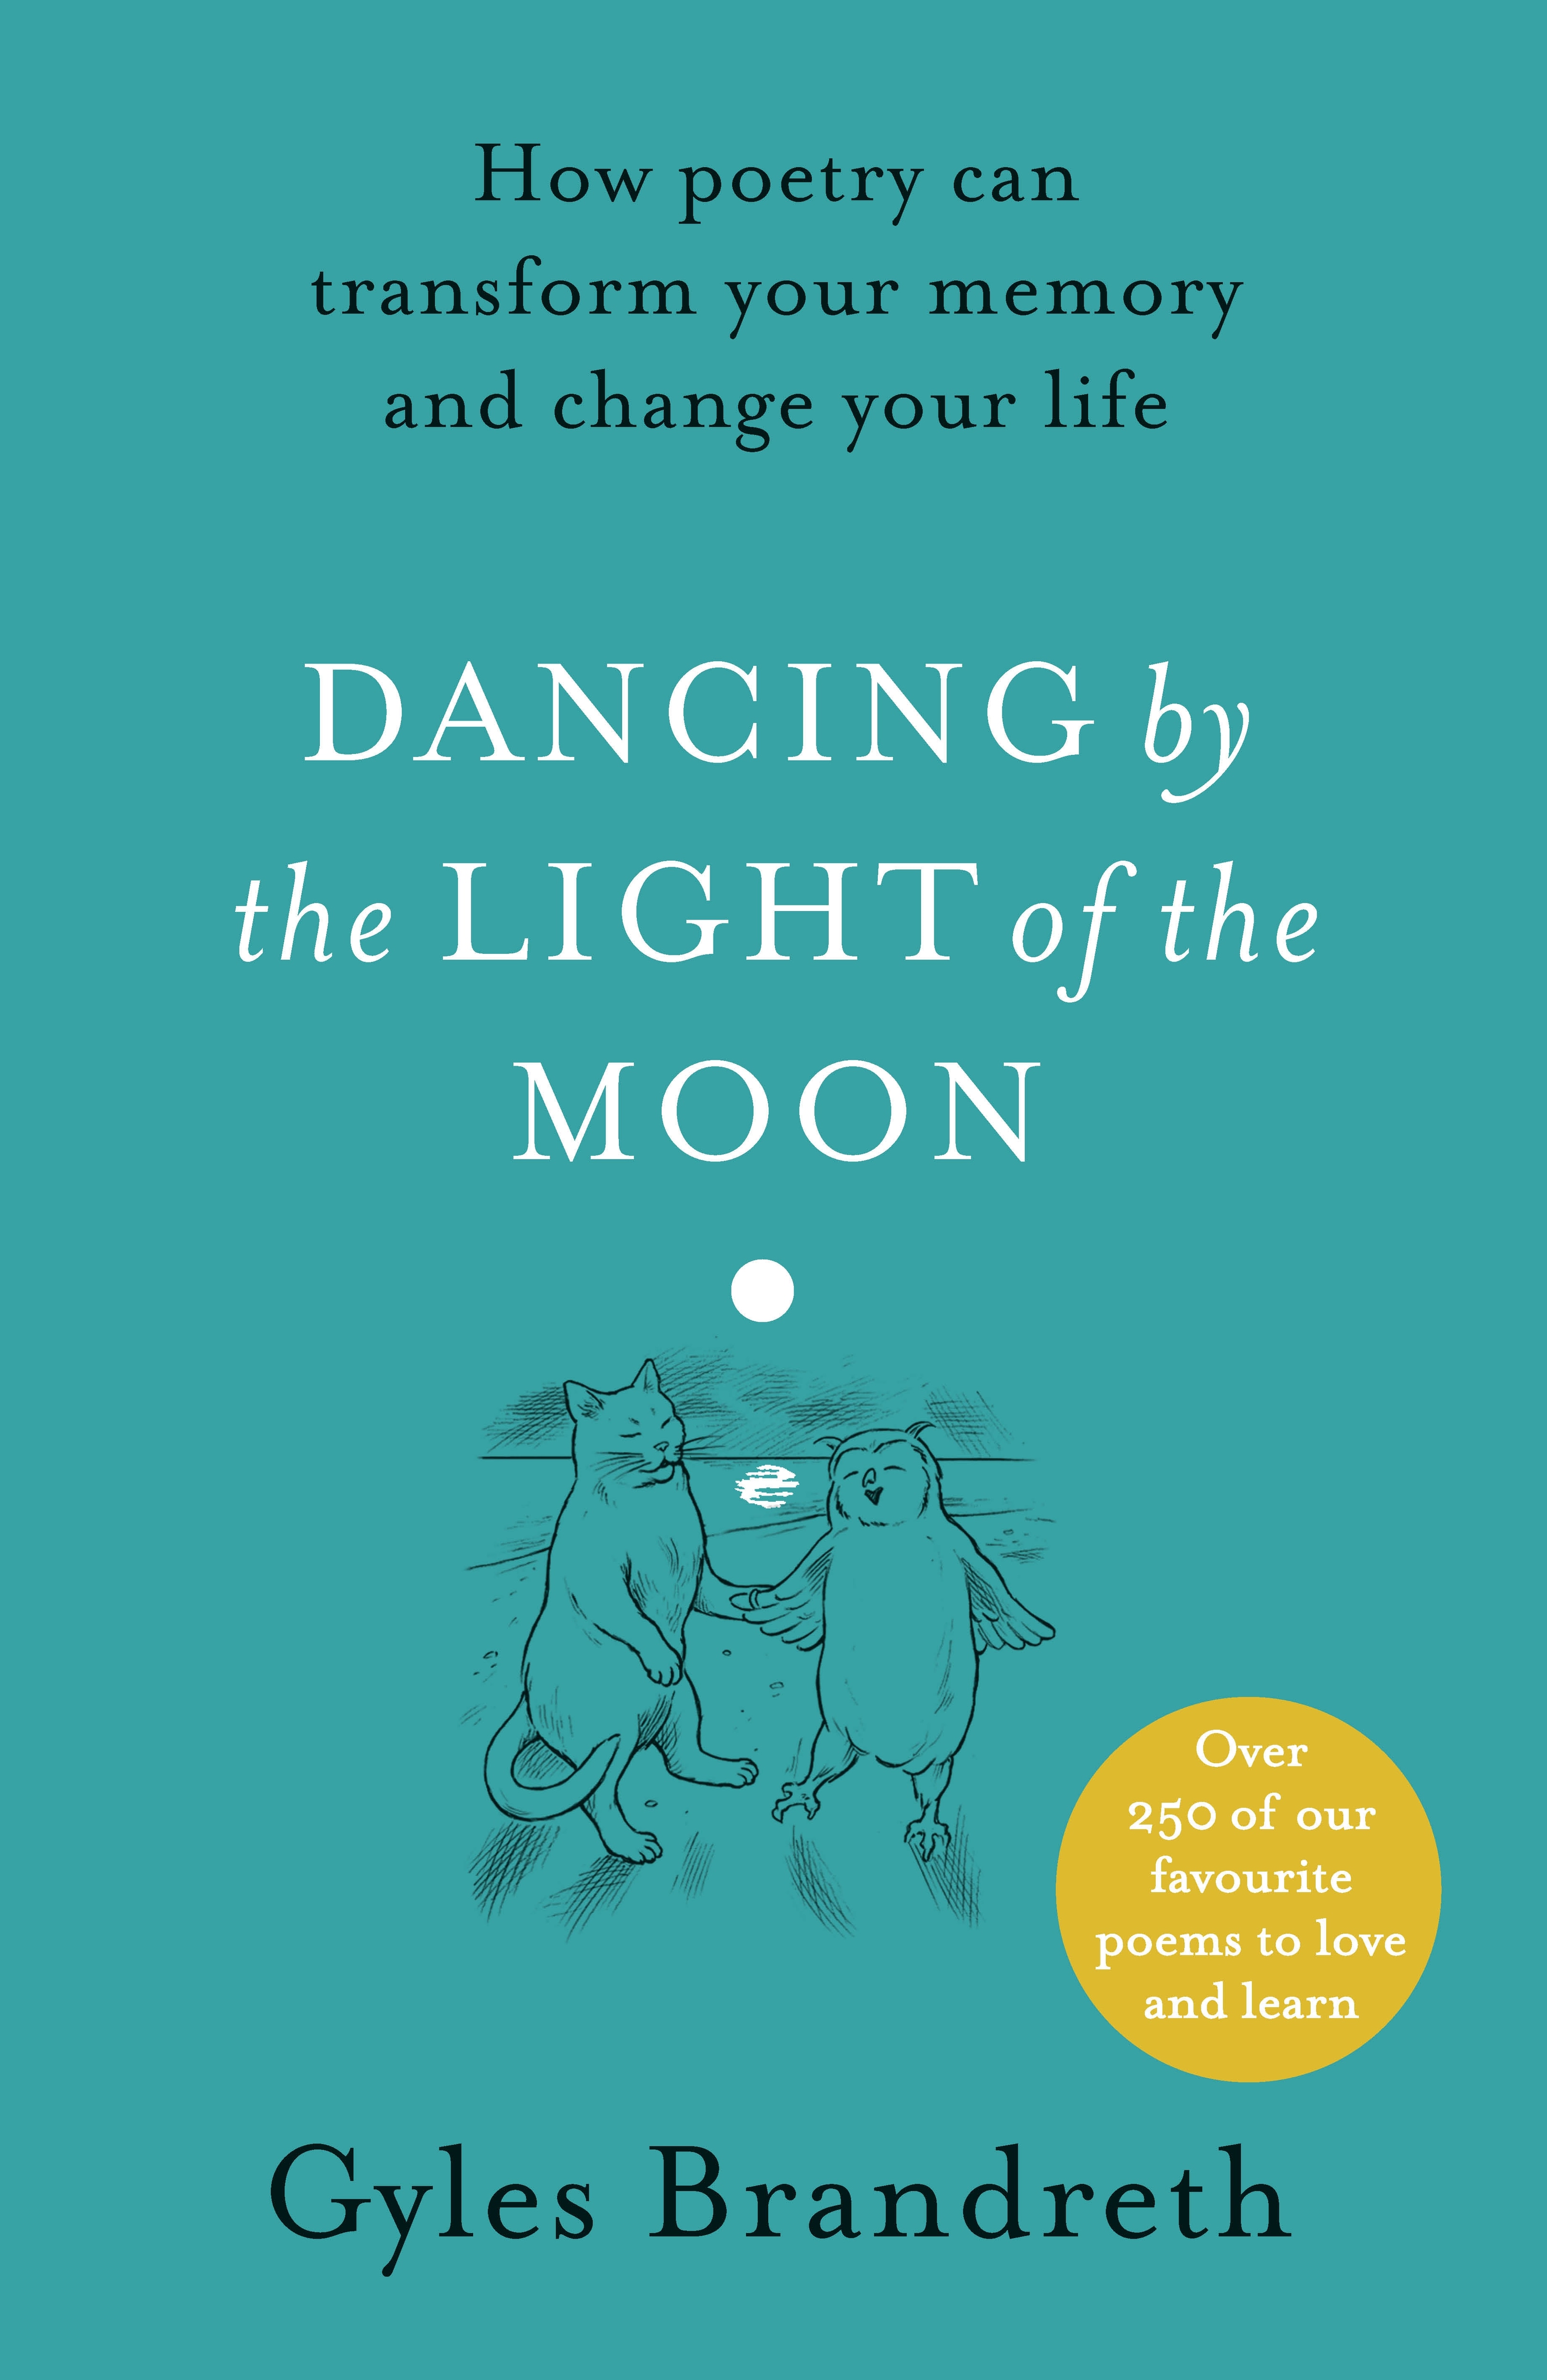 Book “Dancing By The Light of The Moon” by Gyles Brandreth — September 5, 2019